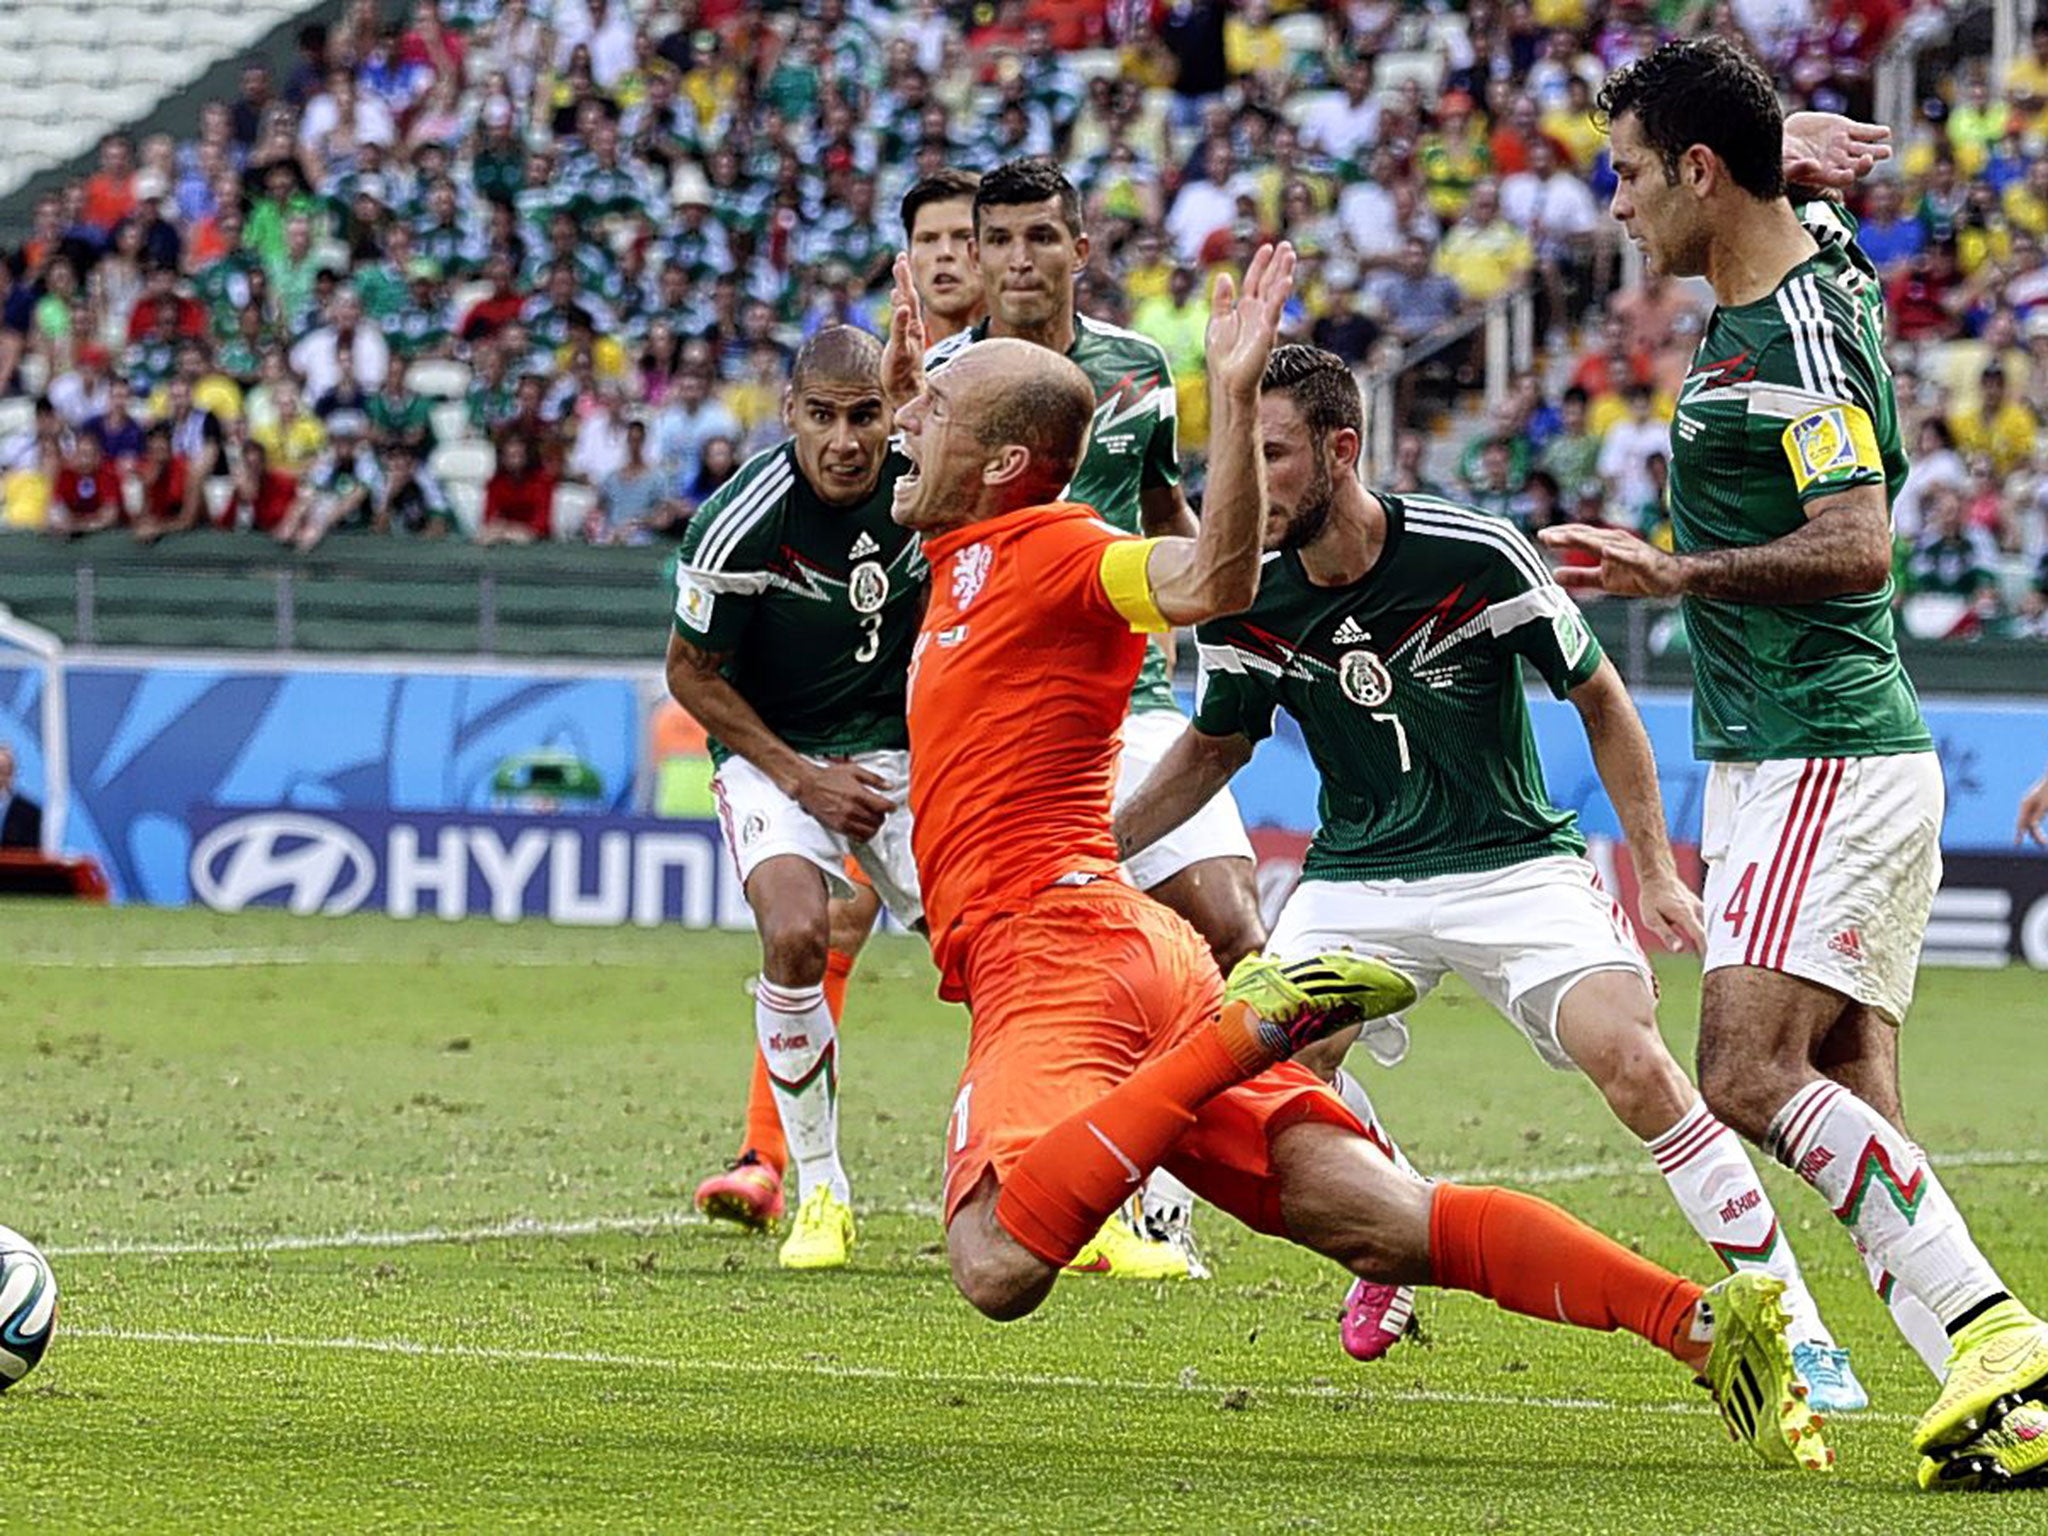 Arjen Robben goes down theatrically after being fouled by Mexico’s Rafael Marquez, leading to the penalty that put Netherlands into the World Cup quarter-finals